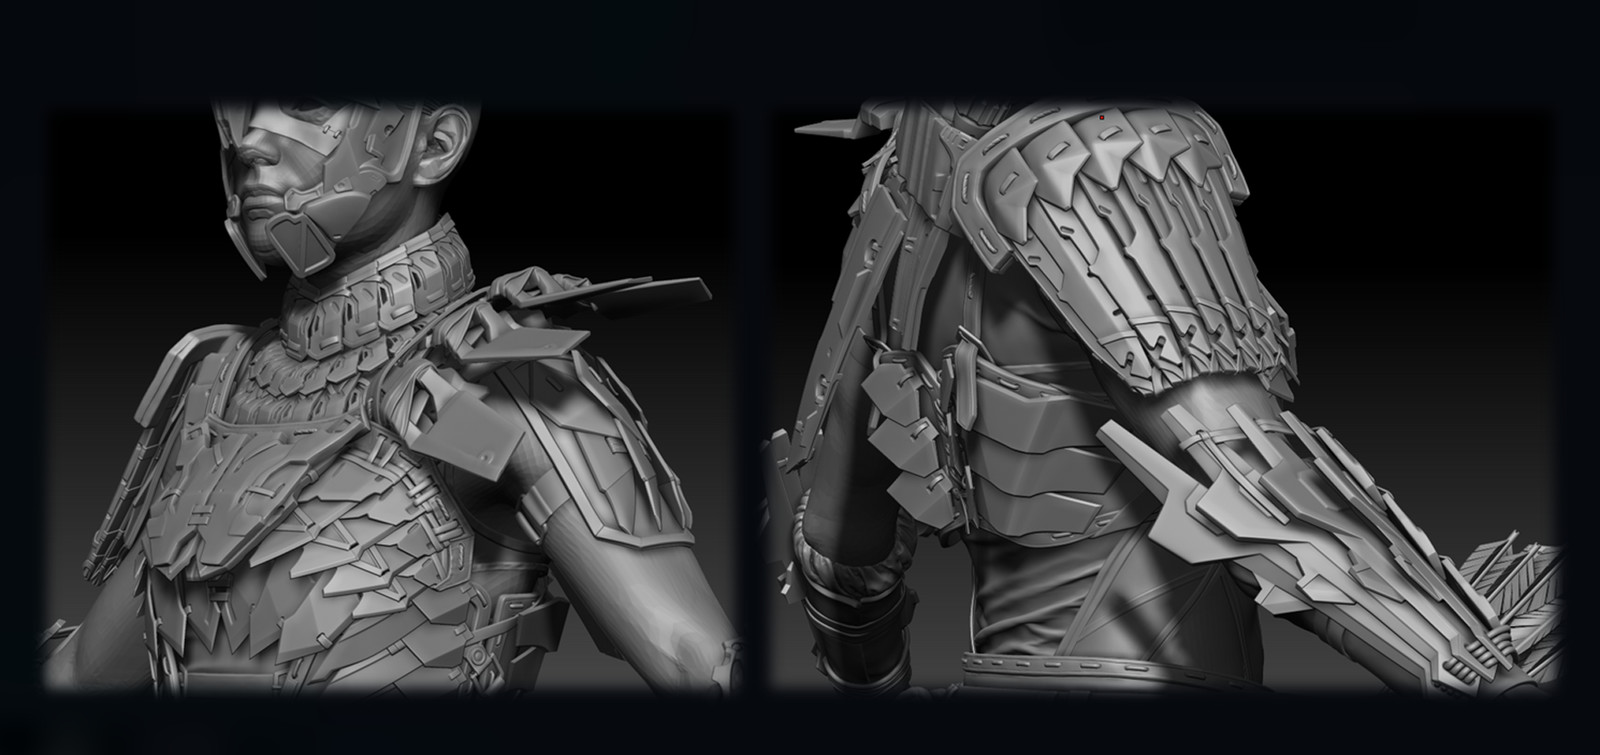 The challenge: imbrication between the more rigid armor and the softer clothing. The armor had to be aesthetically pleasing while looking realistic. The pieces need to interlock at various positions for varied situations and not restrain combat movements.